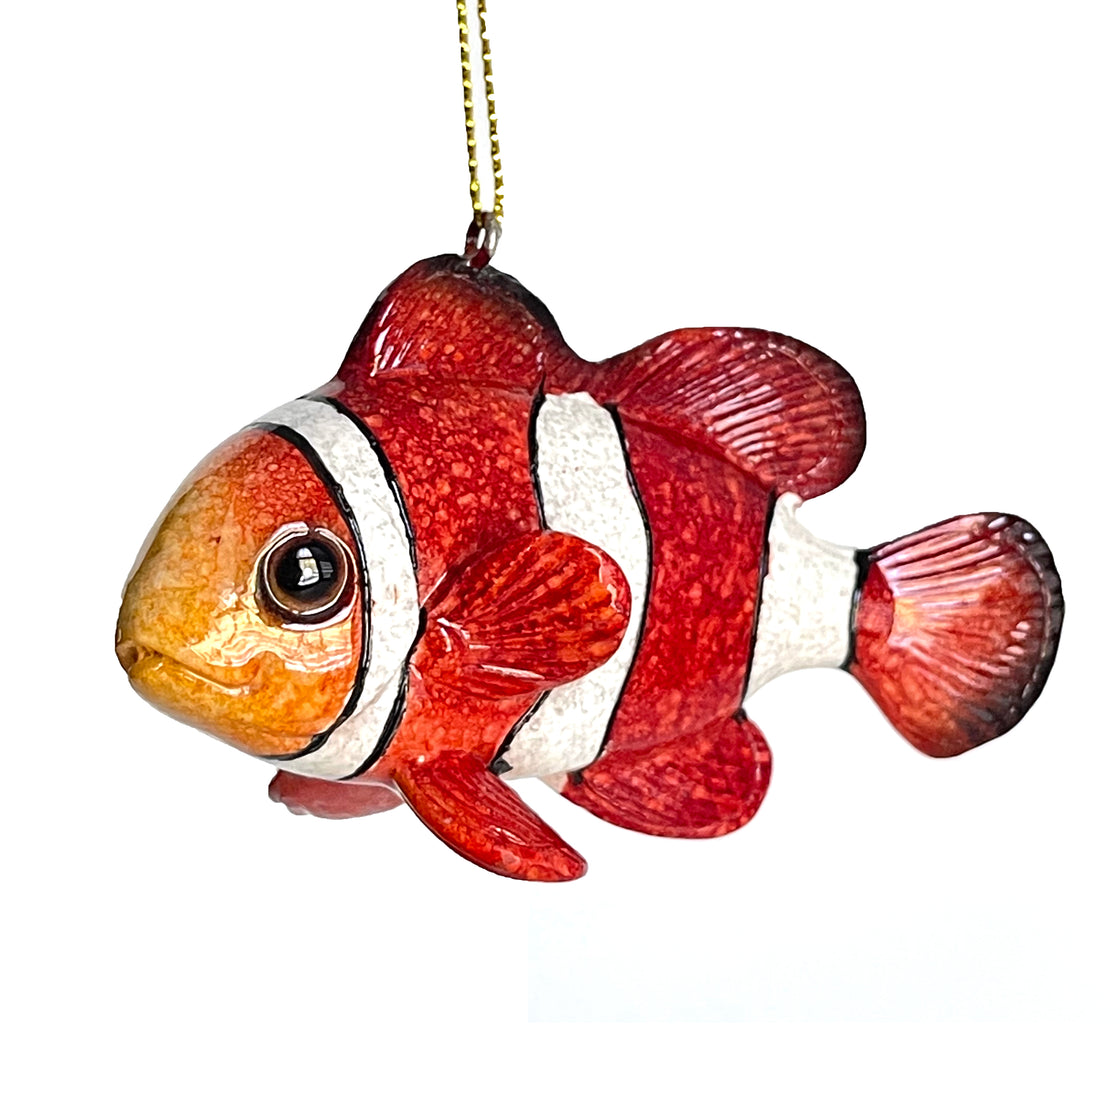 rengöra tropical fish ornament stands out against a clean white background